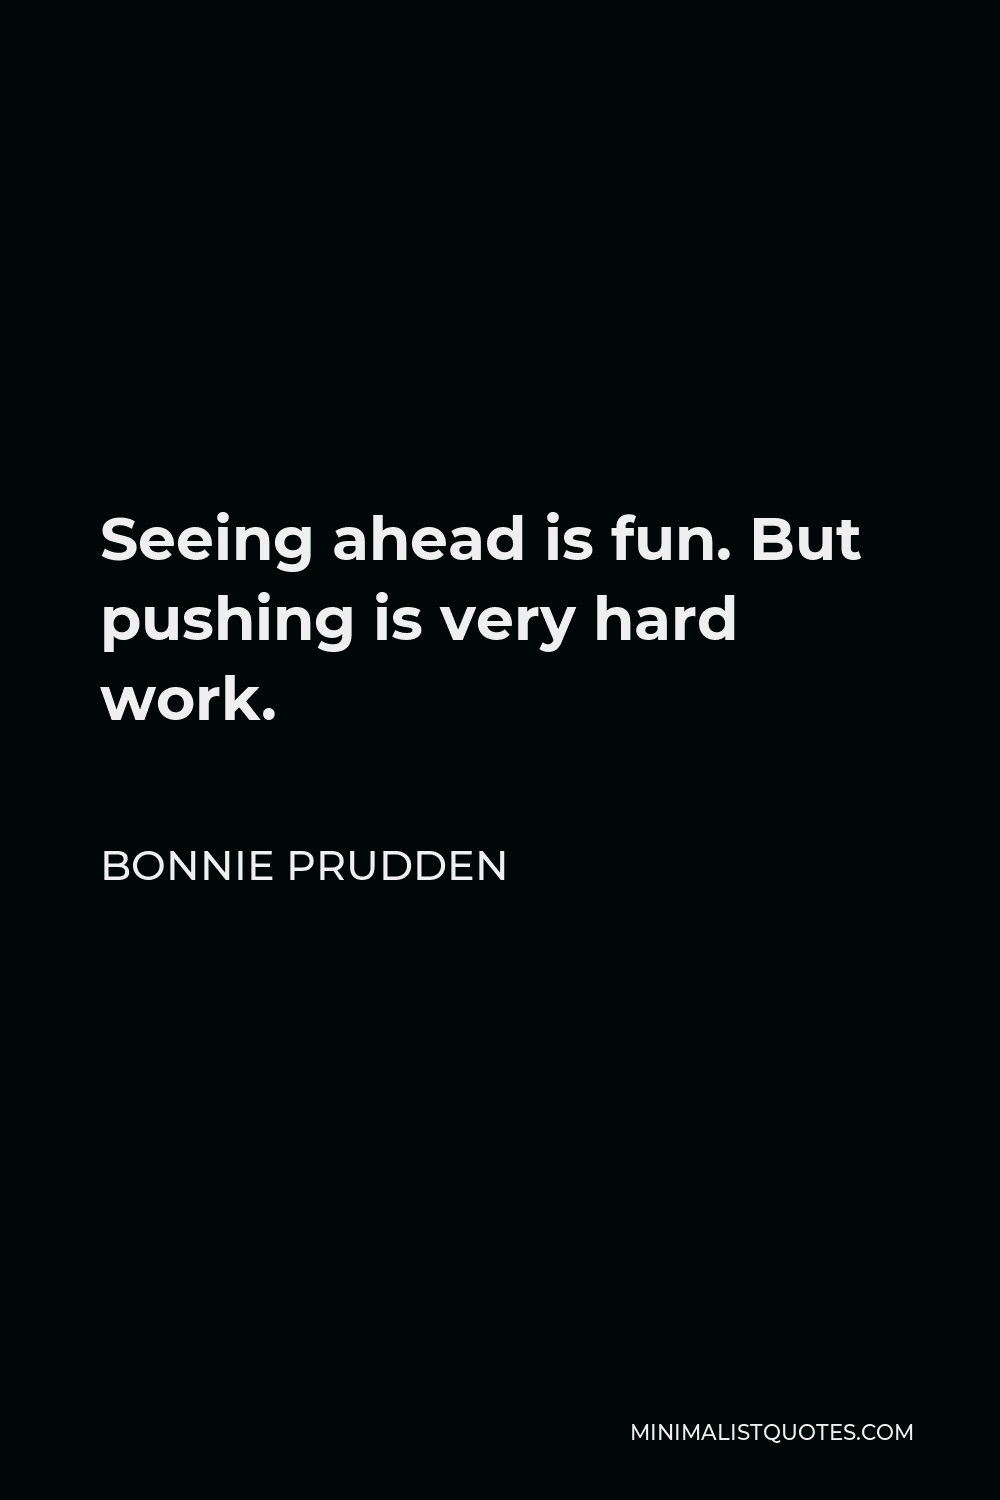 Bonnie Prudden Quote - Seeing ahead is fun. But pushing is very hard work.